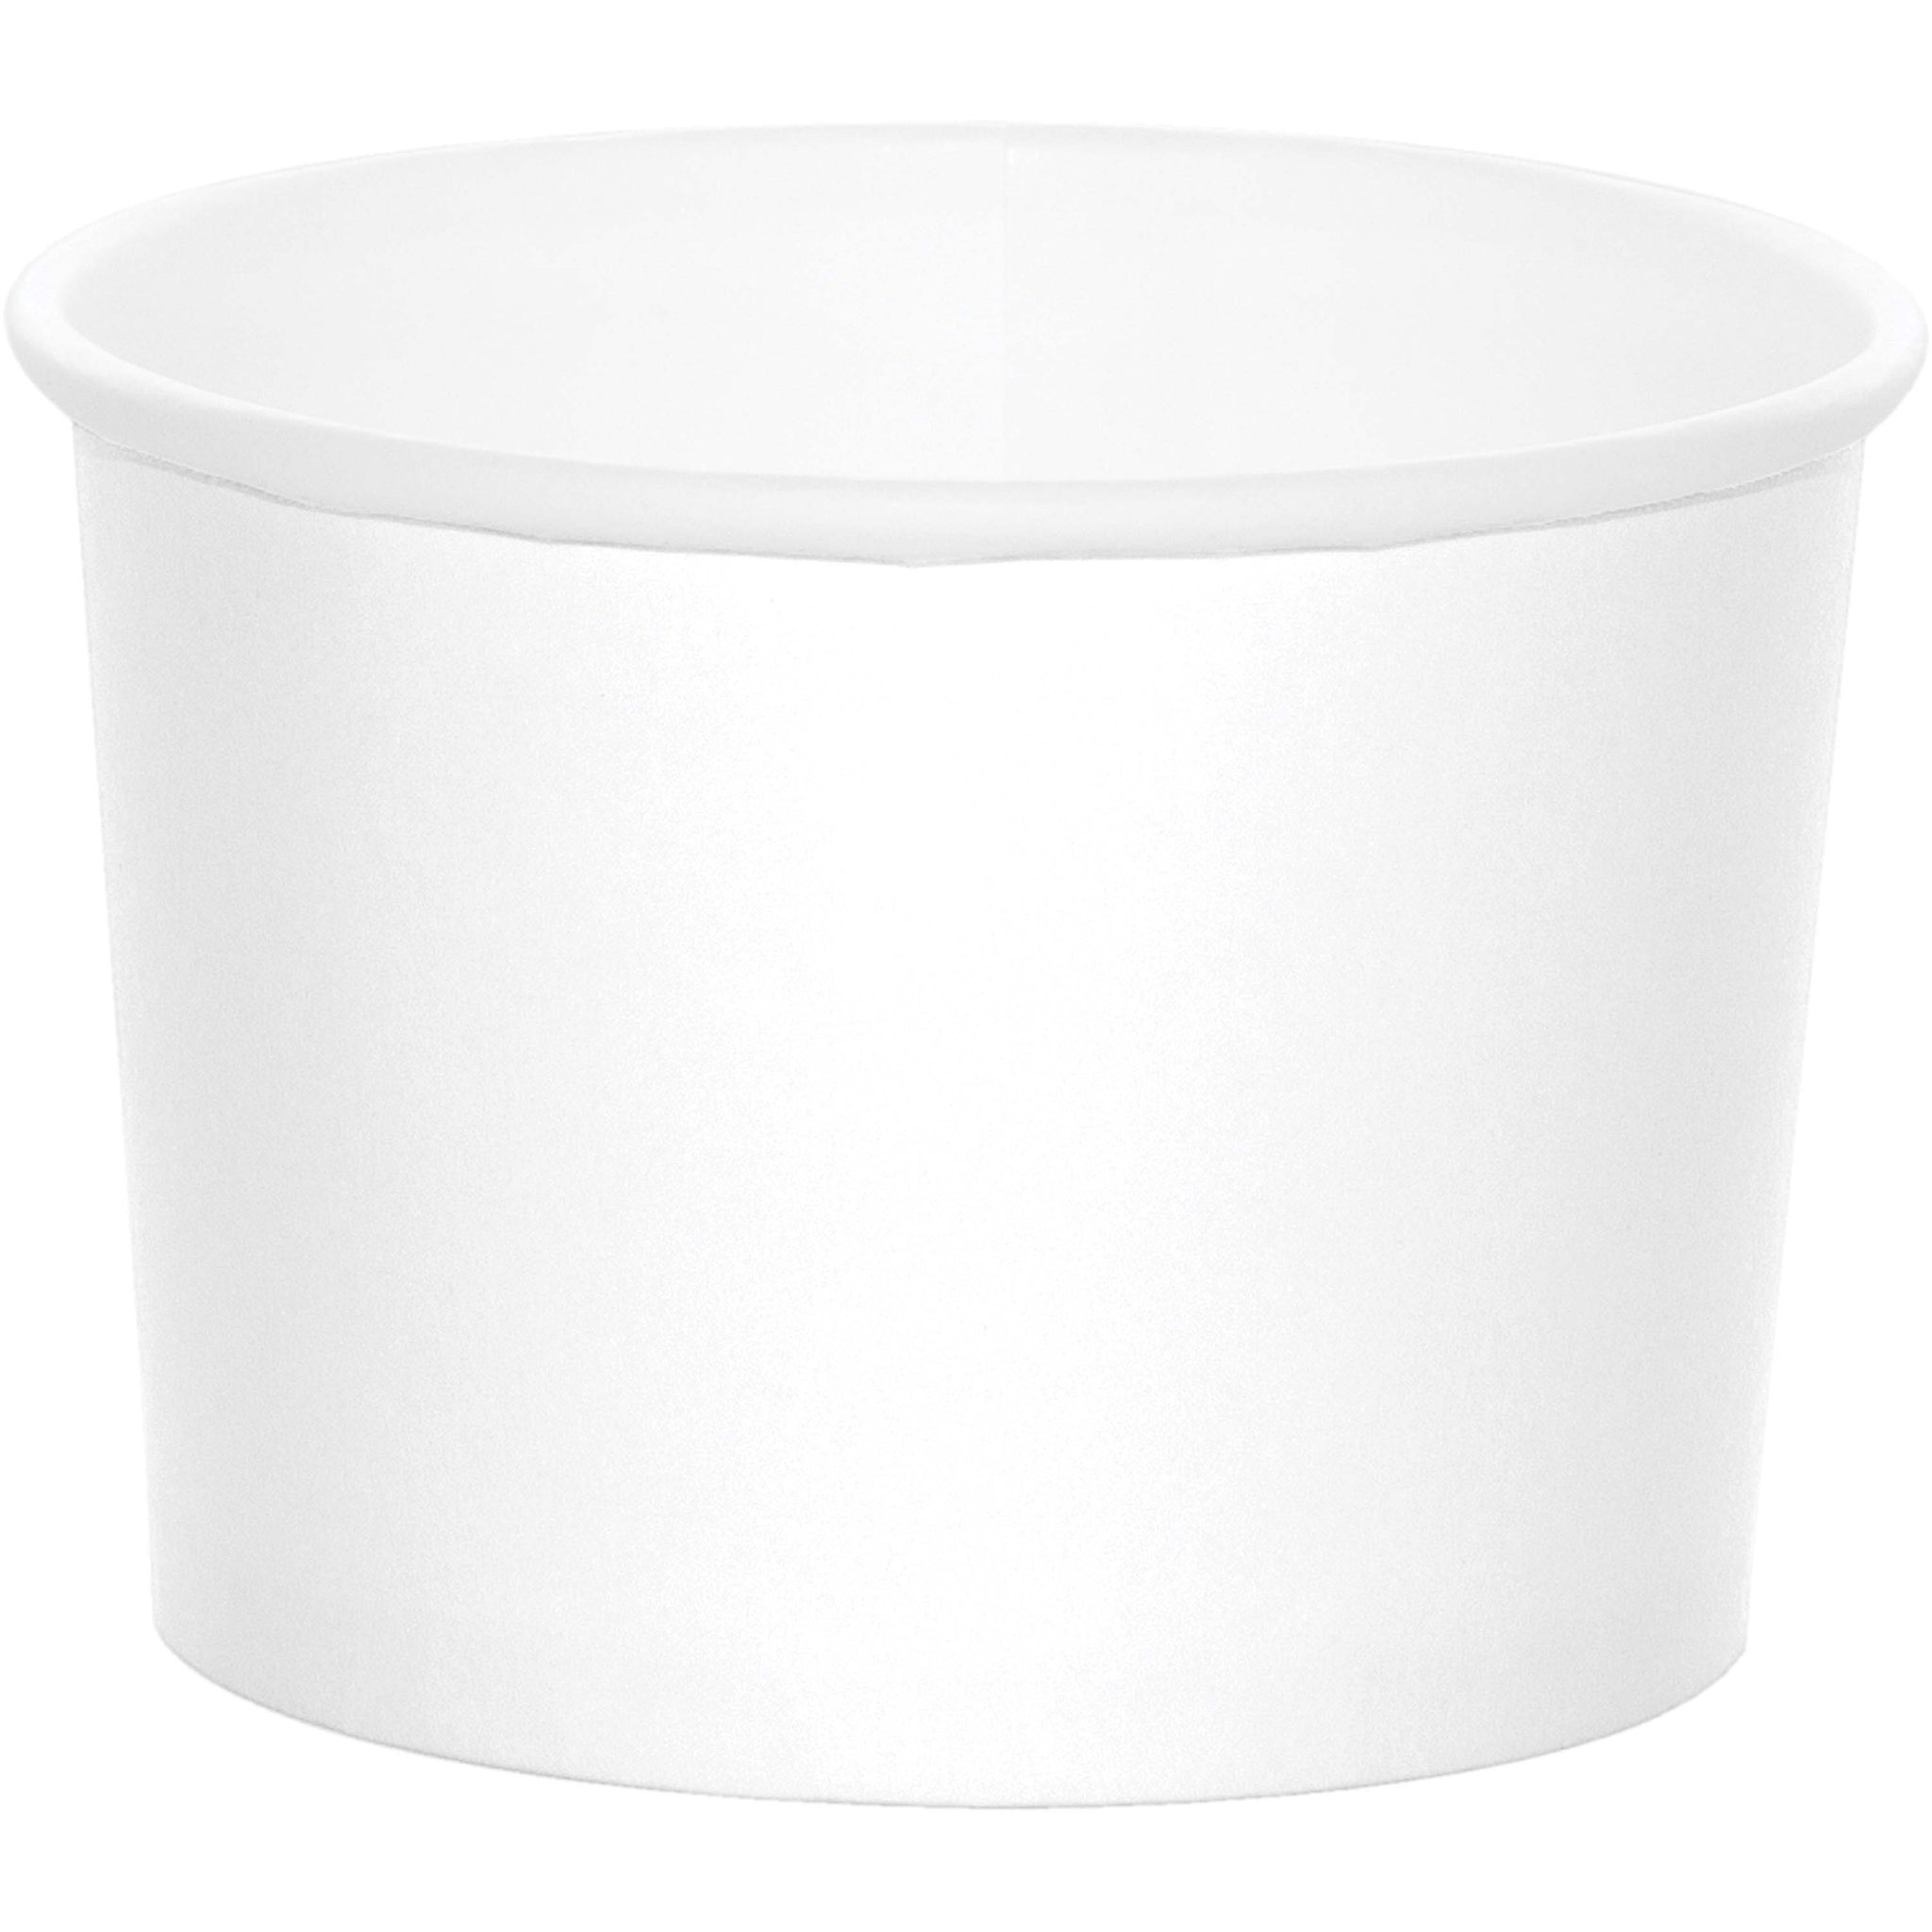 White Paper Treat Cups 8ct | Solids